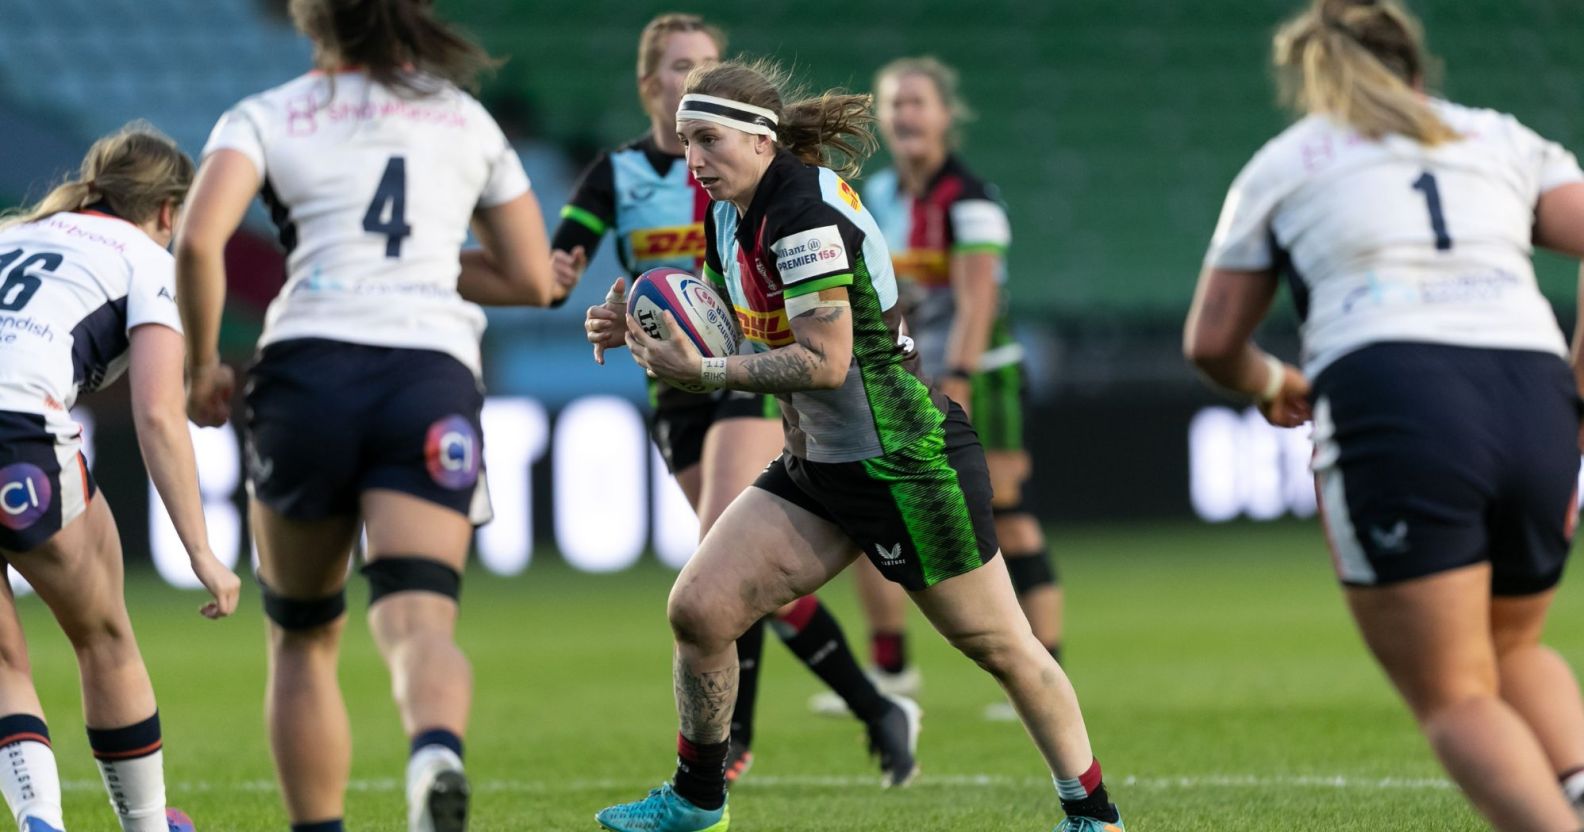 Jade Konkel-Roberts is a Harlequins rugby player.  Here she is pictured in the center playing with her teammates.